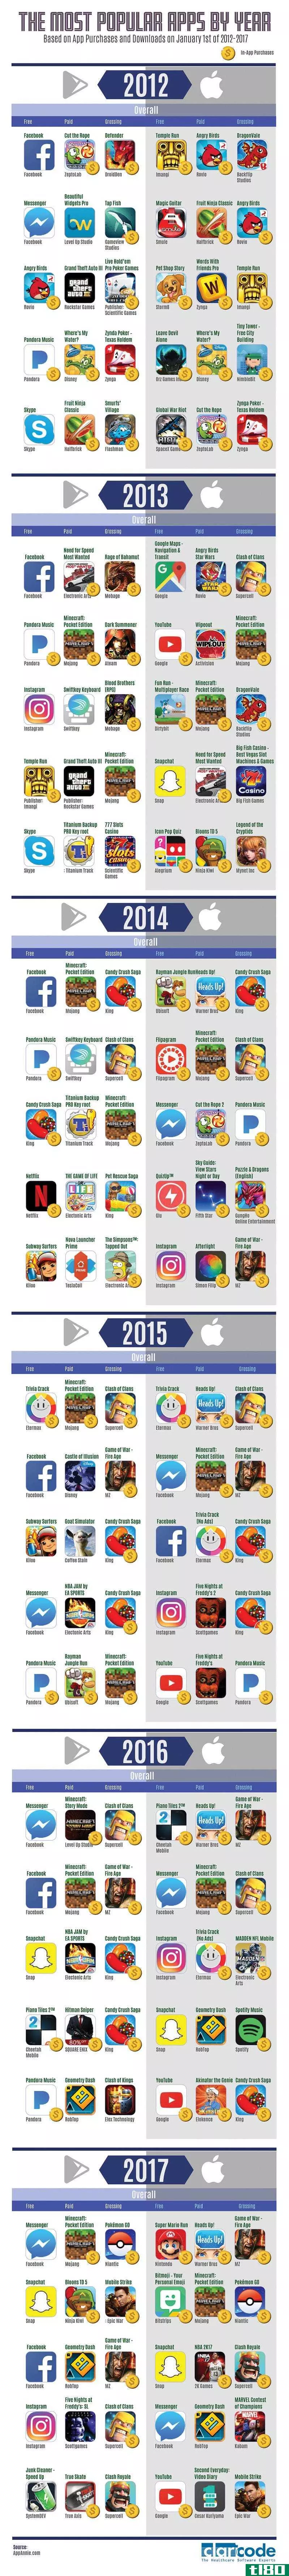 Illustration for article titled Six Years of the Most Popular Apps, in One Infographic